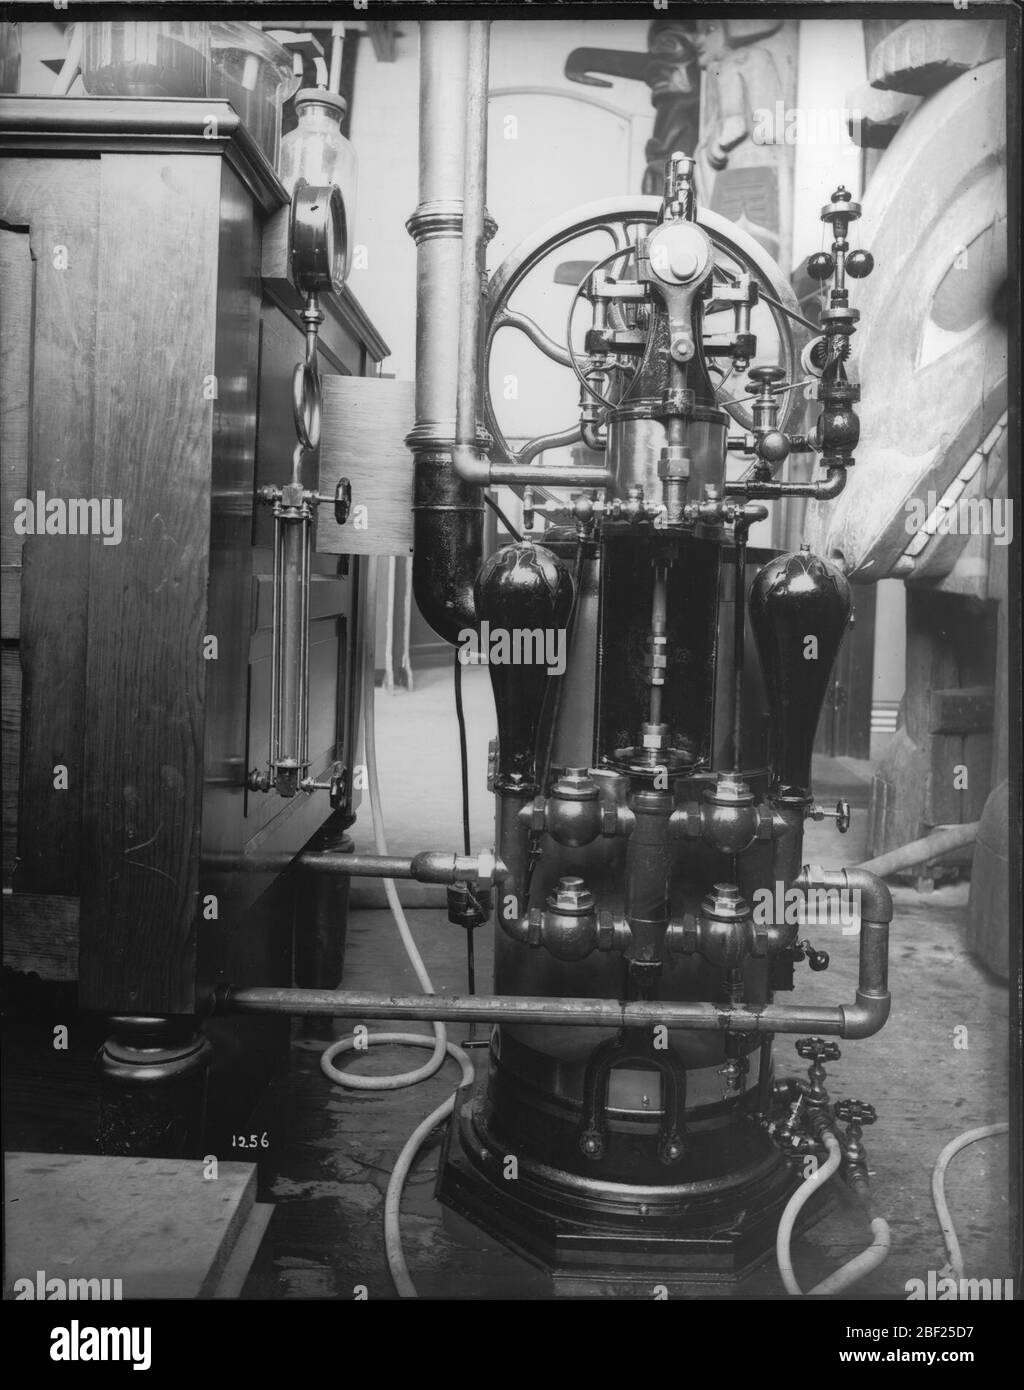 Steam Engine at United States National Museum. Steam engine in the United States National Museum, now known as the Arts and Industries Building.Smithsonian Institution Archives, Acc. 11-006, Box 001, Image No. Stock Photo